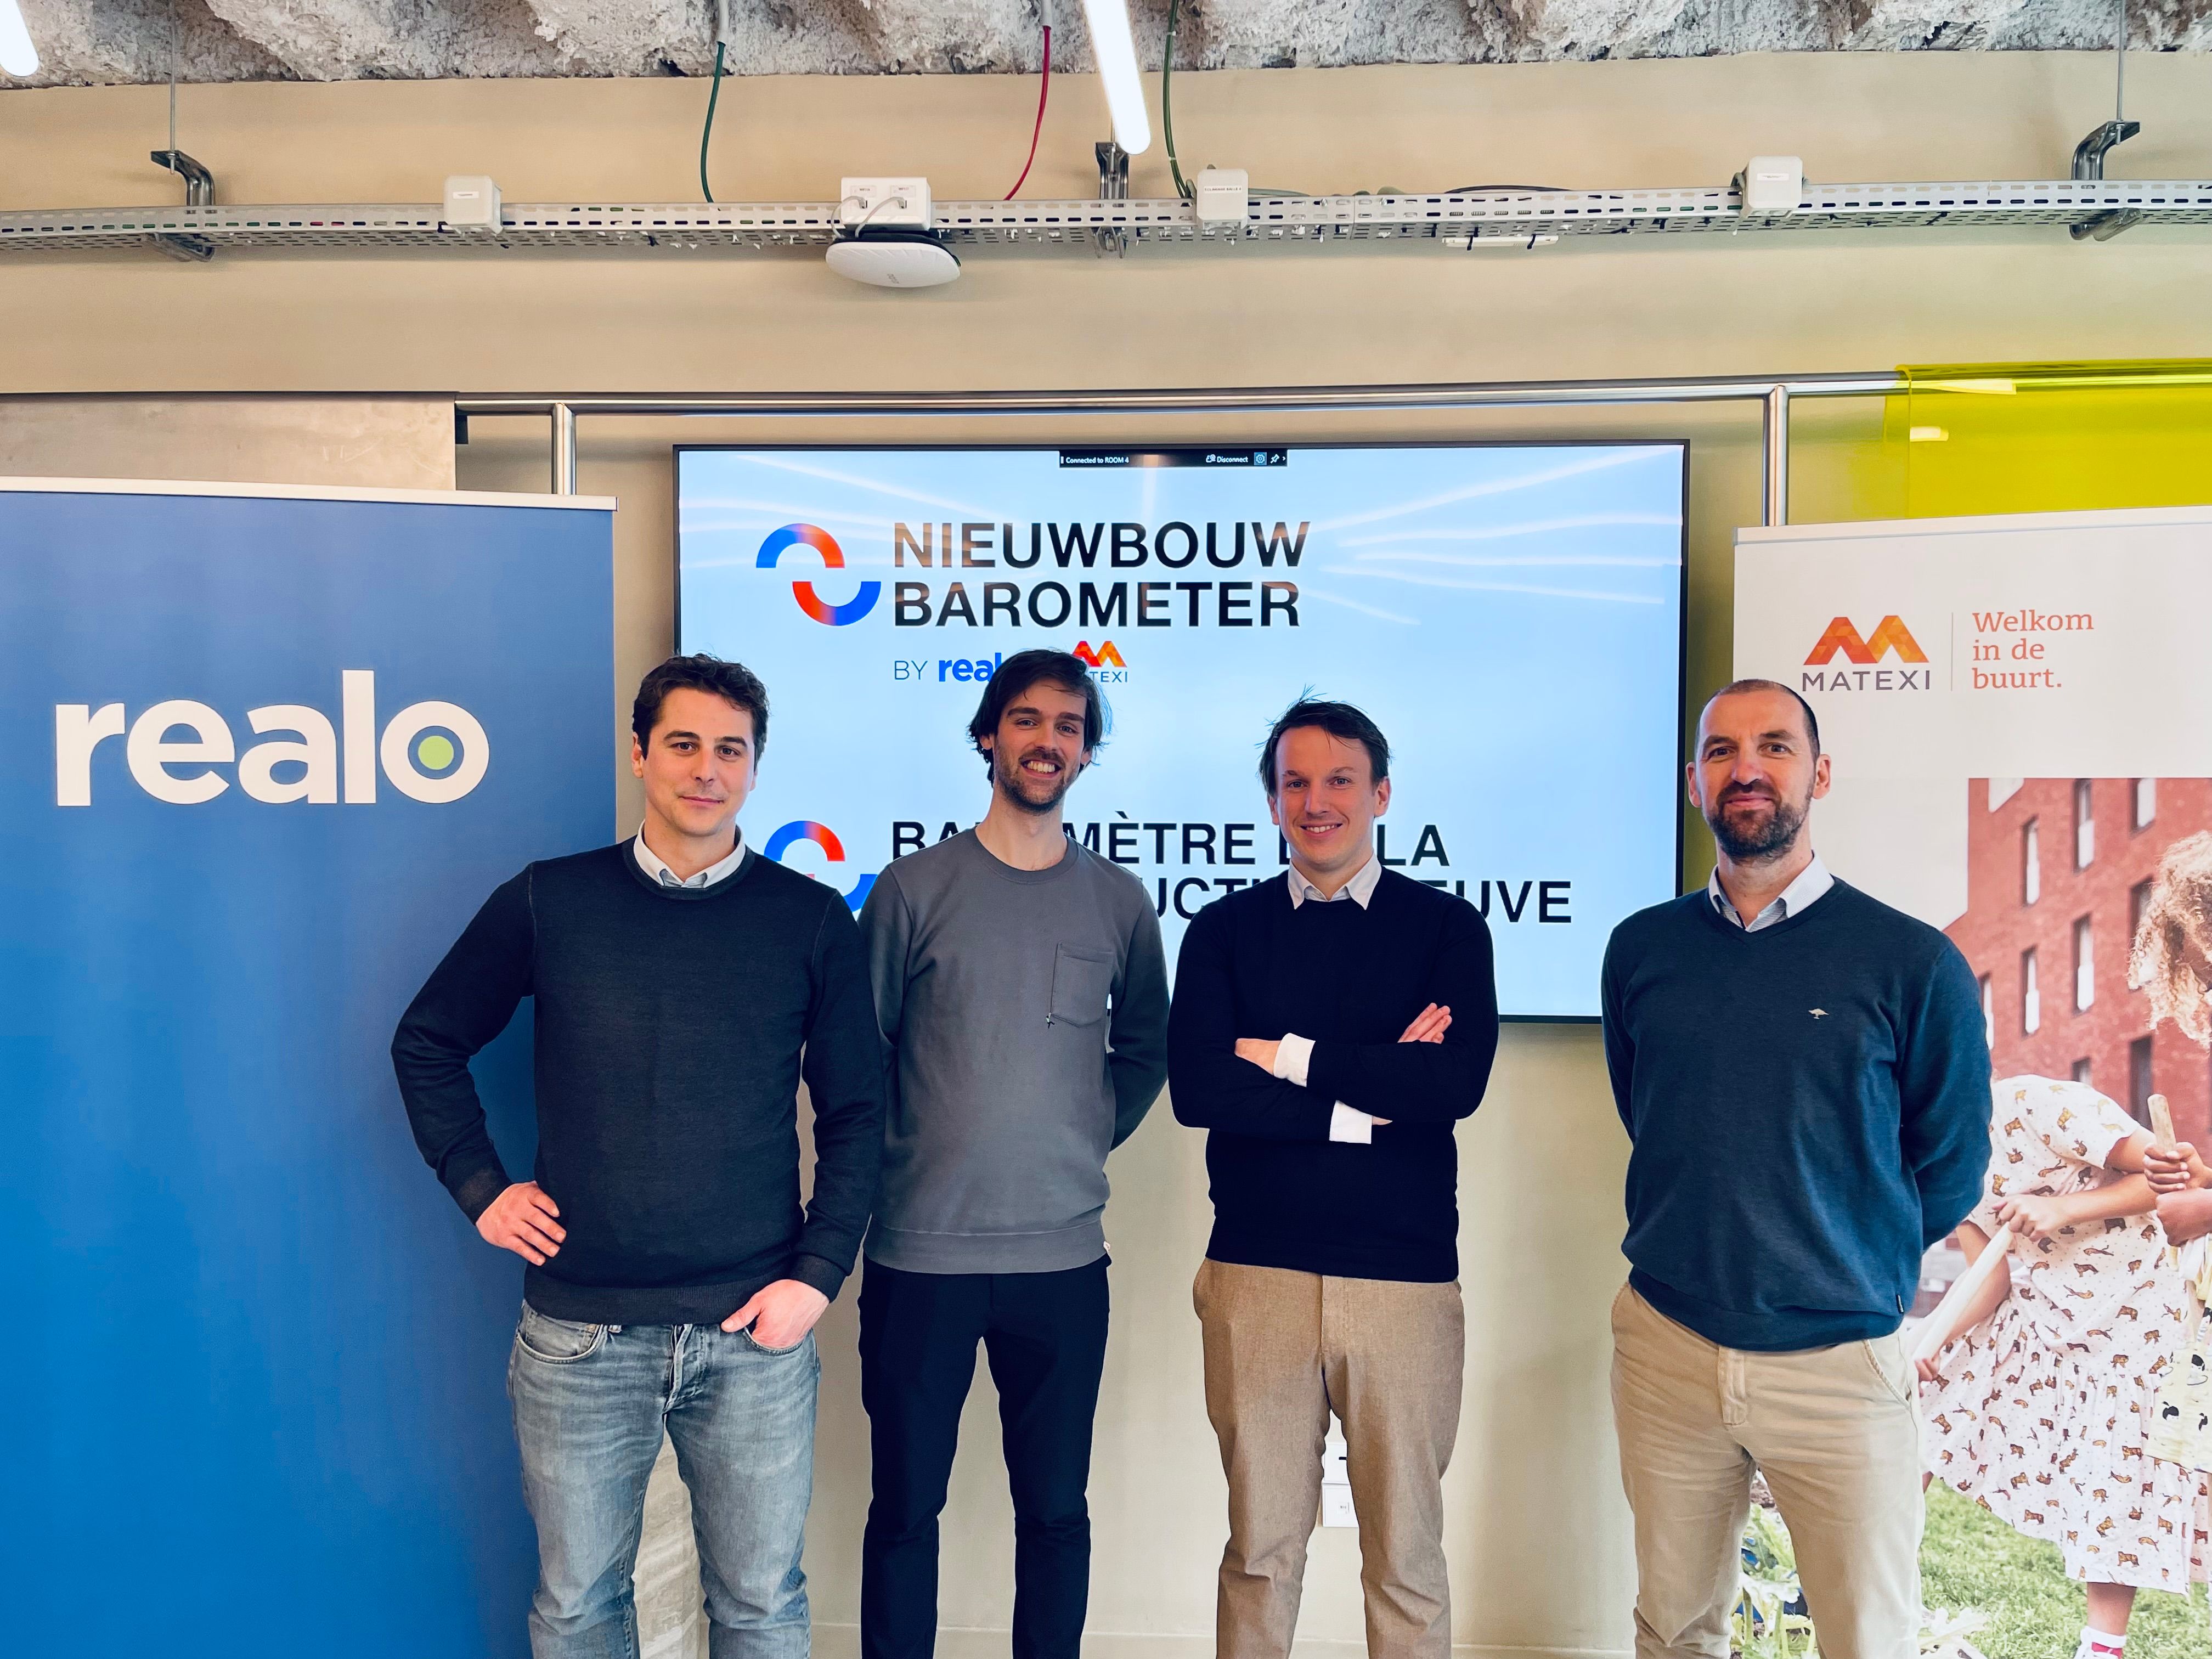 From left to right: CEO Realo Vincent Verlee, Lead Data Researcher Realo Fabrice Luyckx, Market Economist Matexi Roel Helgers and Acquisition & Development Director Matexi Kristoff De Winne.